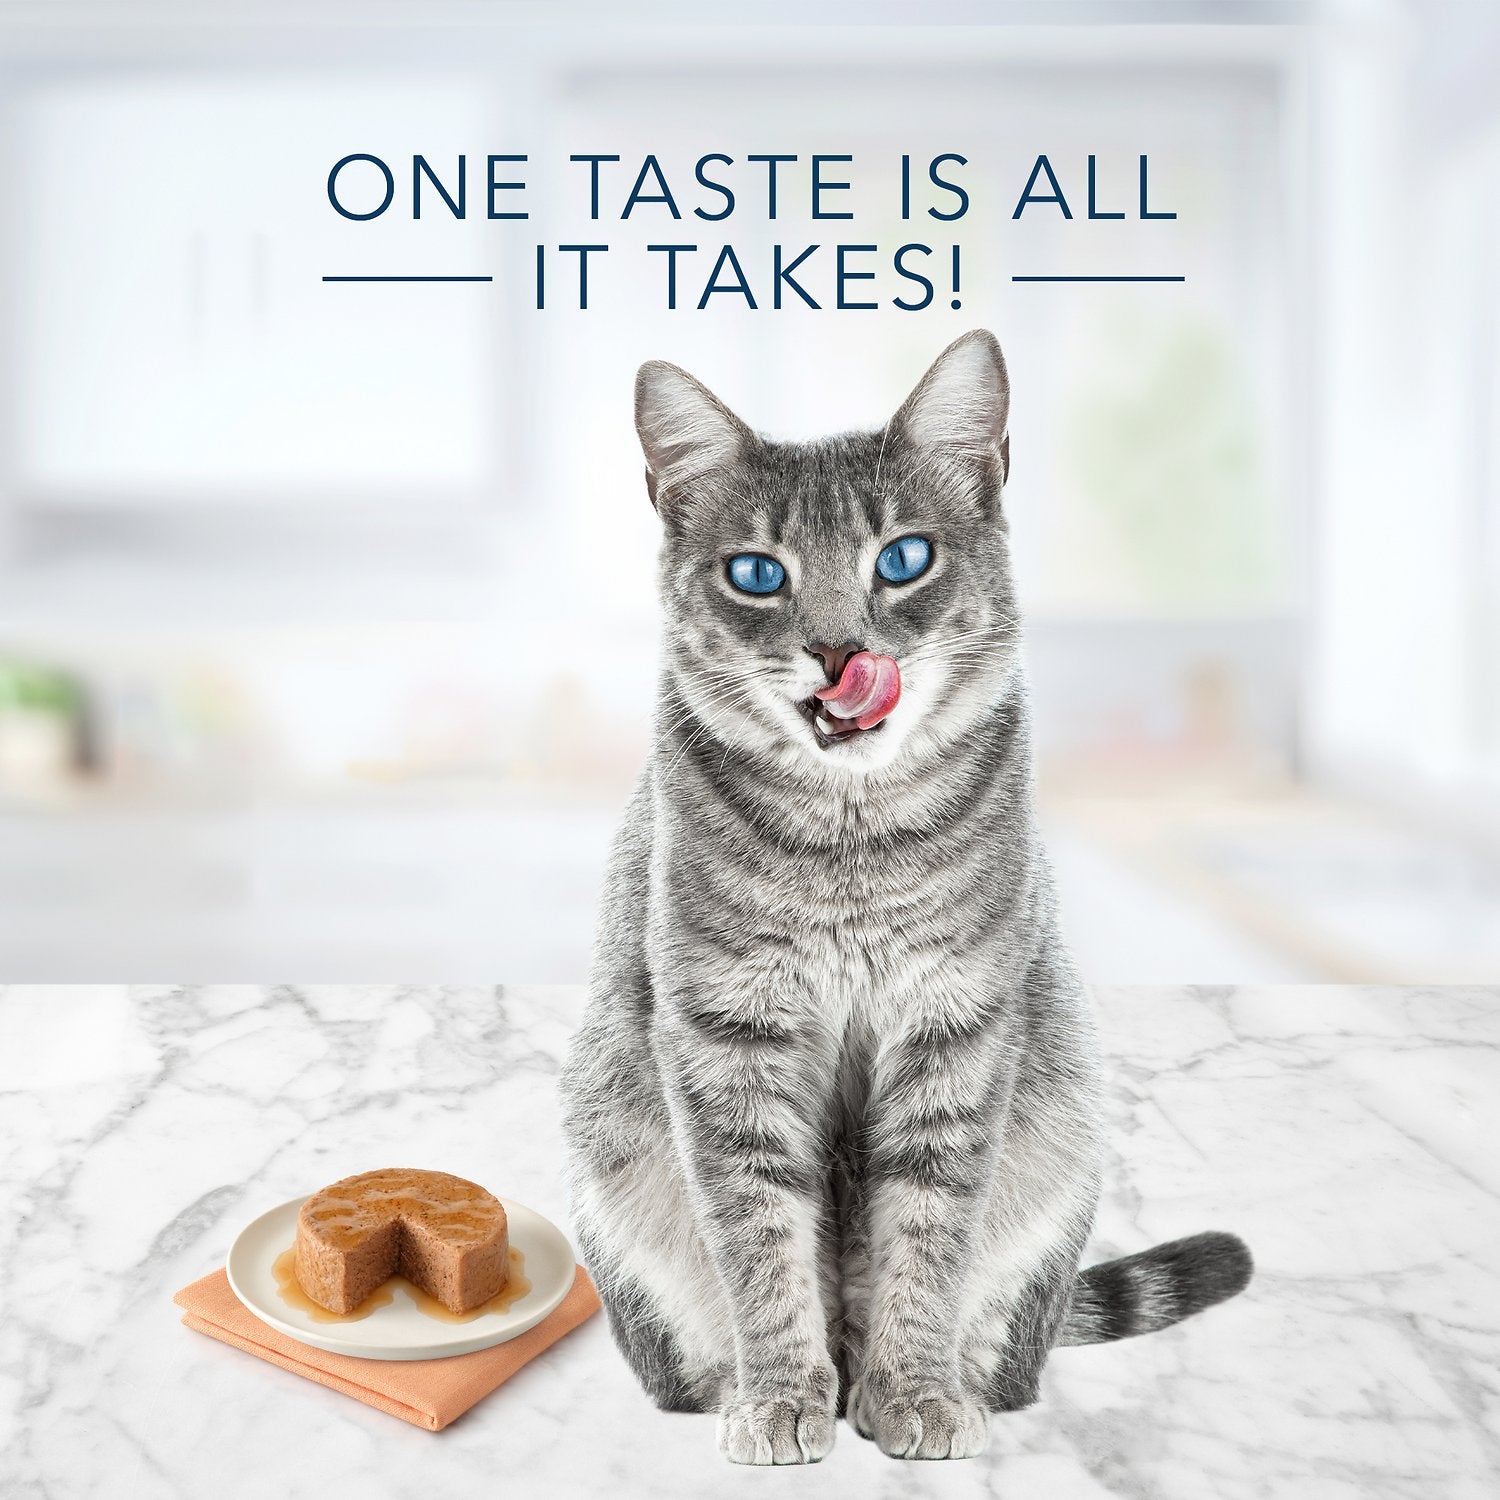 Blue Buffalo Tastefuls Adult Chicken Entree Pate  Canned Cat Food  | PetMax Canada